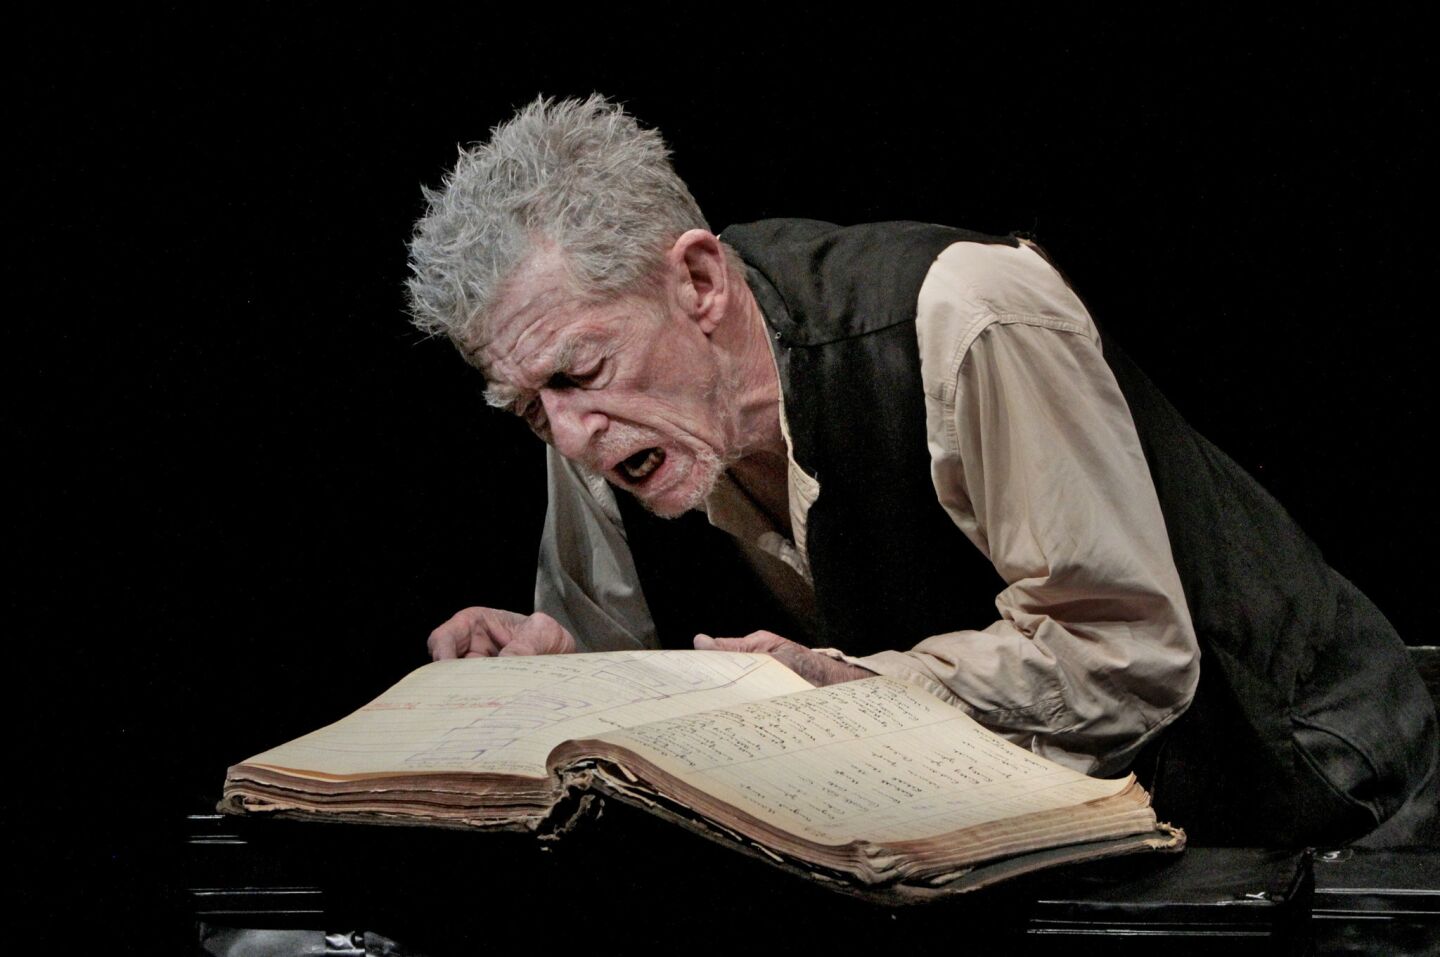 Arts and culture in pictures by The Times | John Hurt in 'Krapp's Last Tape'